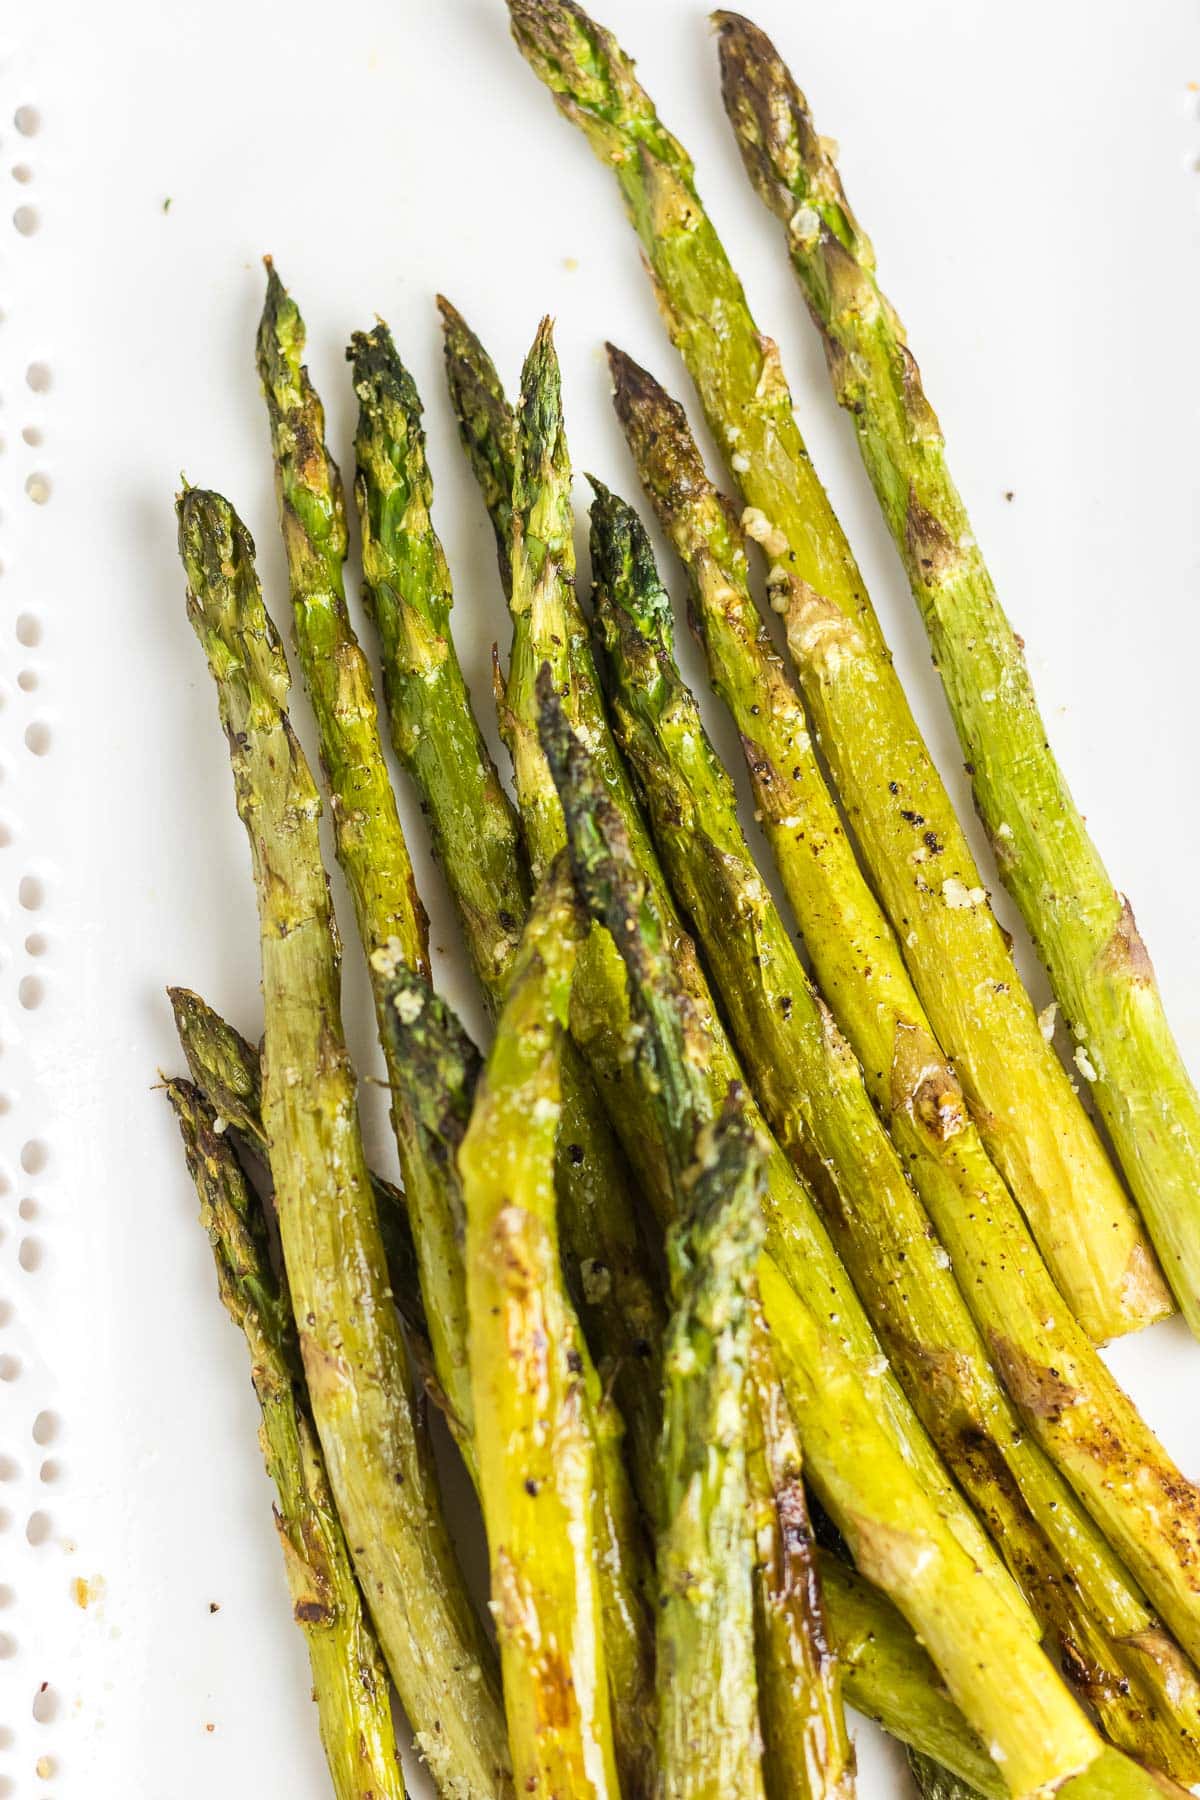 An up-close photo of roasted asparagus spears.